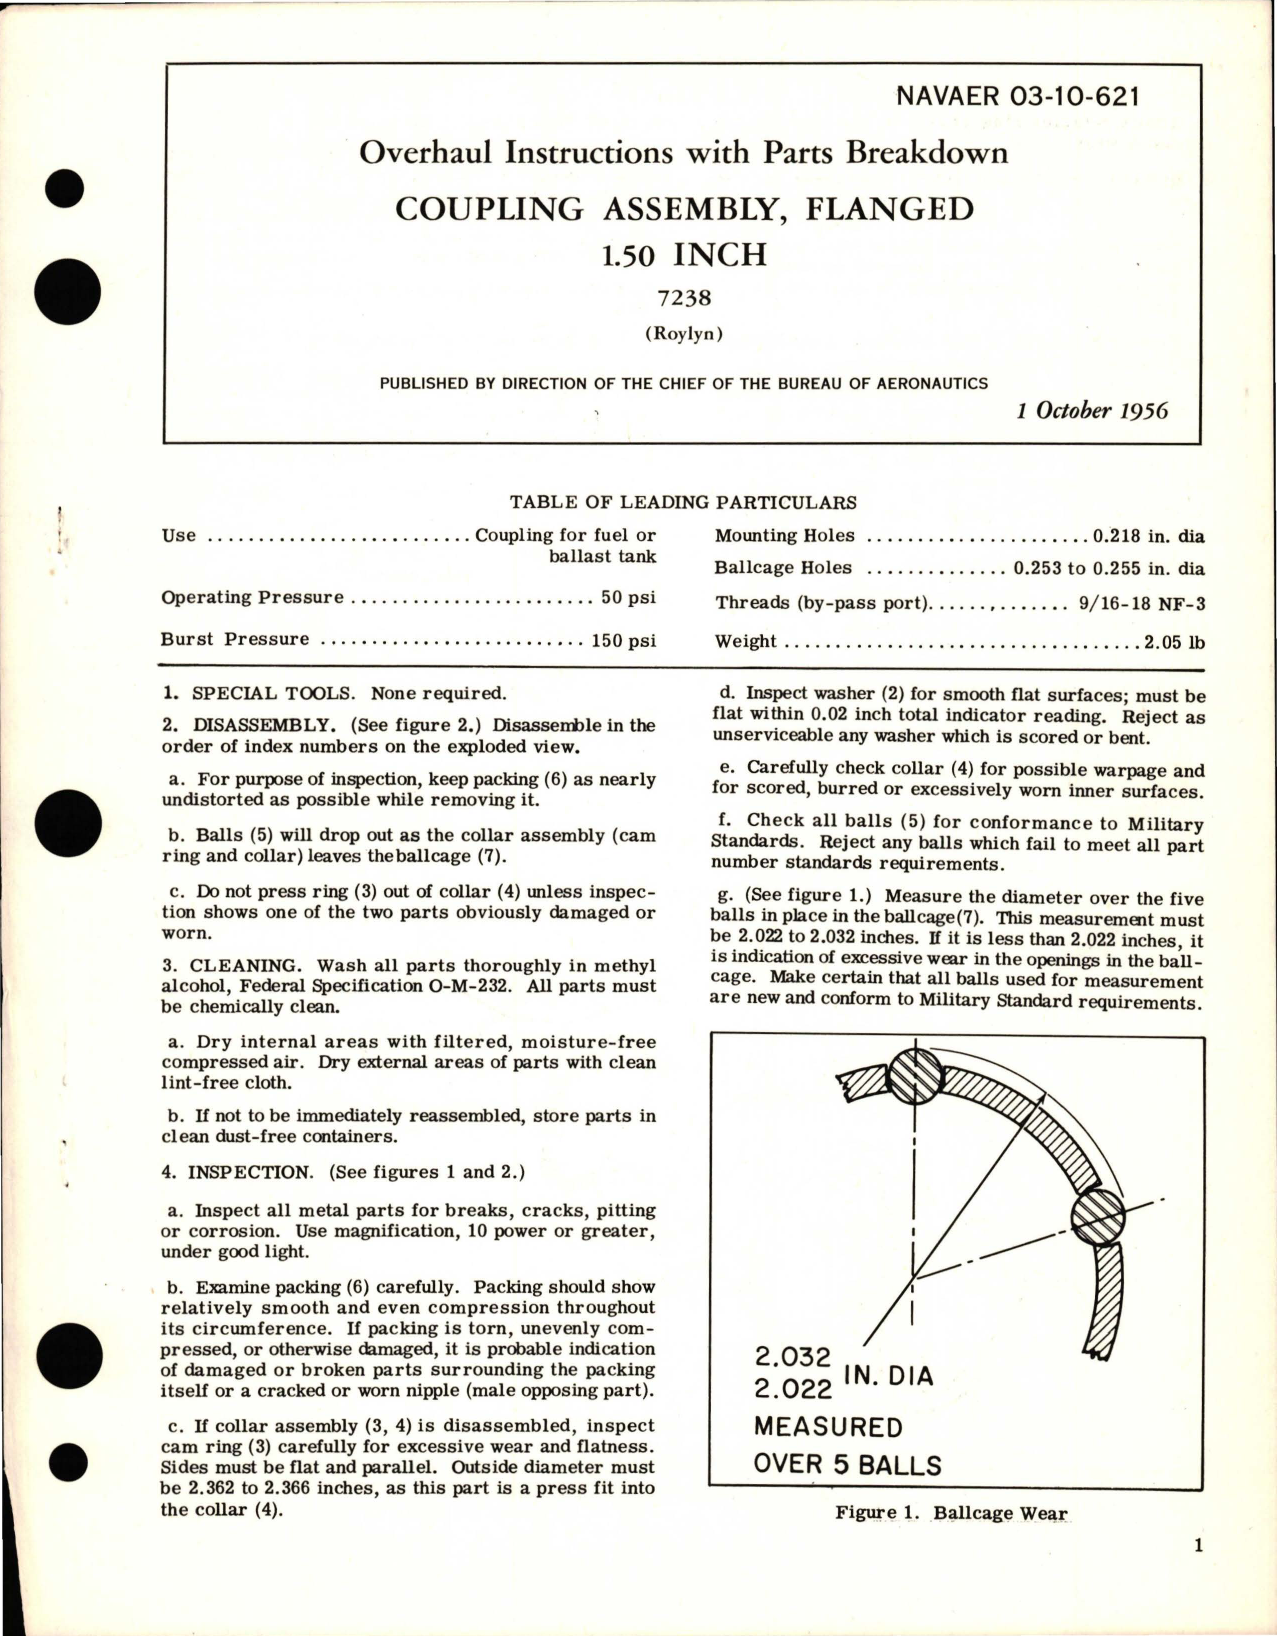 Sample page 1 from AirCorps Library document: Overhaul Instructions with Parts for Flanged Coupling Assembly - 1.5 Inch - 7238